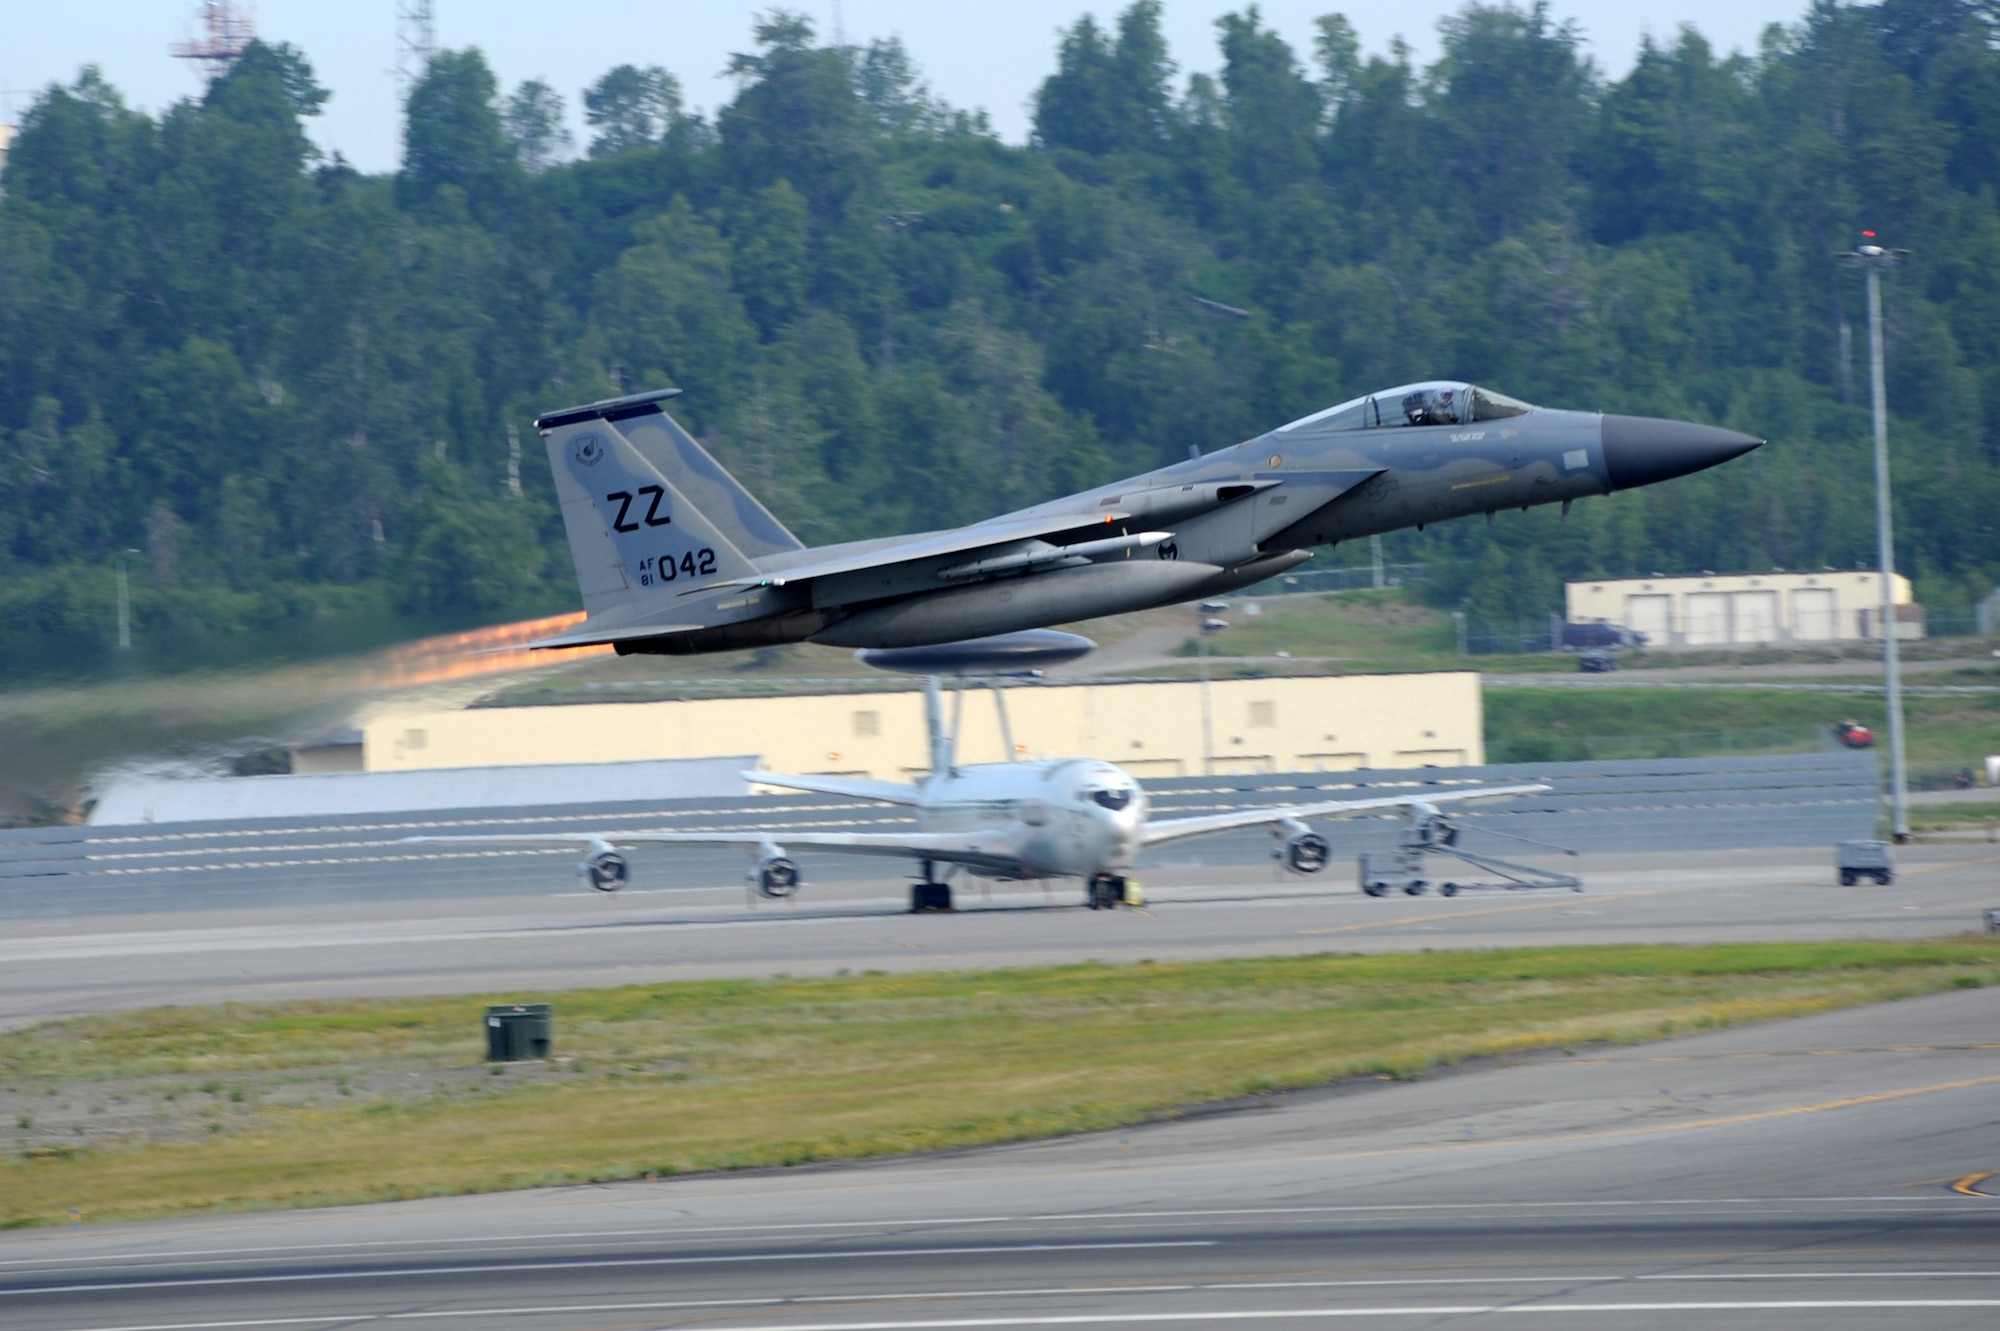 An F-15C Eagle from the 67th Fighter Squadron at Kadena Air Base, Japan, takes off during exercise Northern Edge from Joint Base Elmendorf-Richardson, Alaska, June 16, 2015. Northern Edge 2015 is Alaska’s premier joint training exercise designed to practice operations, techniques and procedures as well as enhance interoperability among the services. Thousands of participants from all the services and components were involved. (U.S. Air Force photo/Staff Sgt. William Banton)